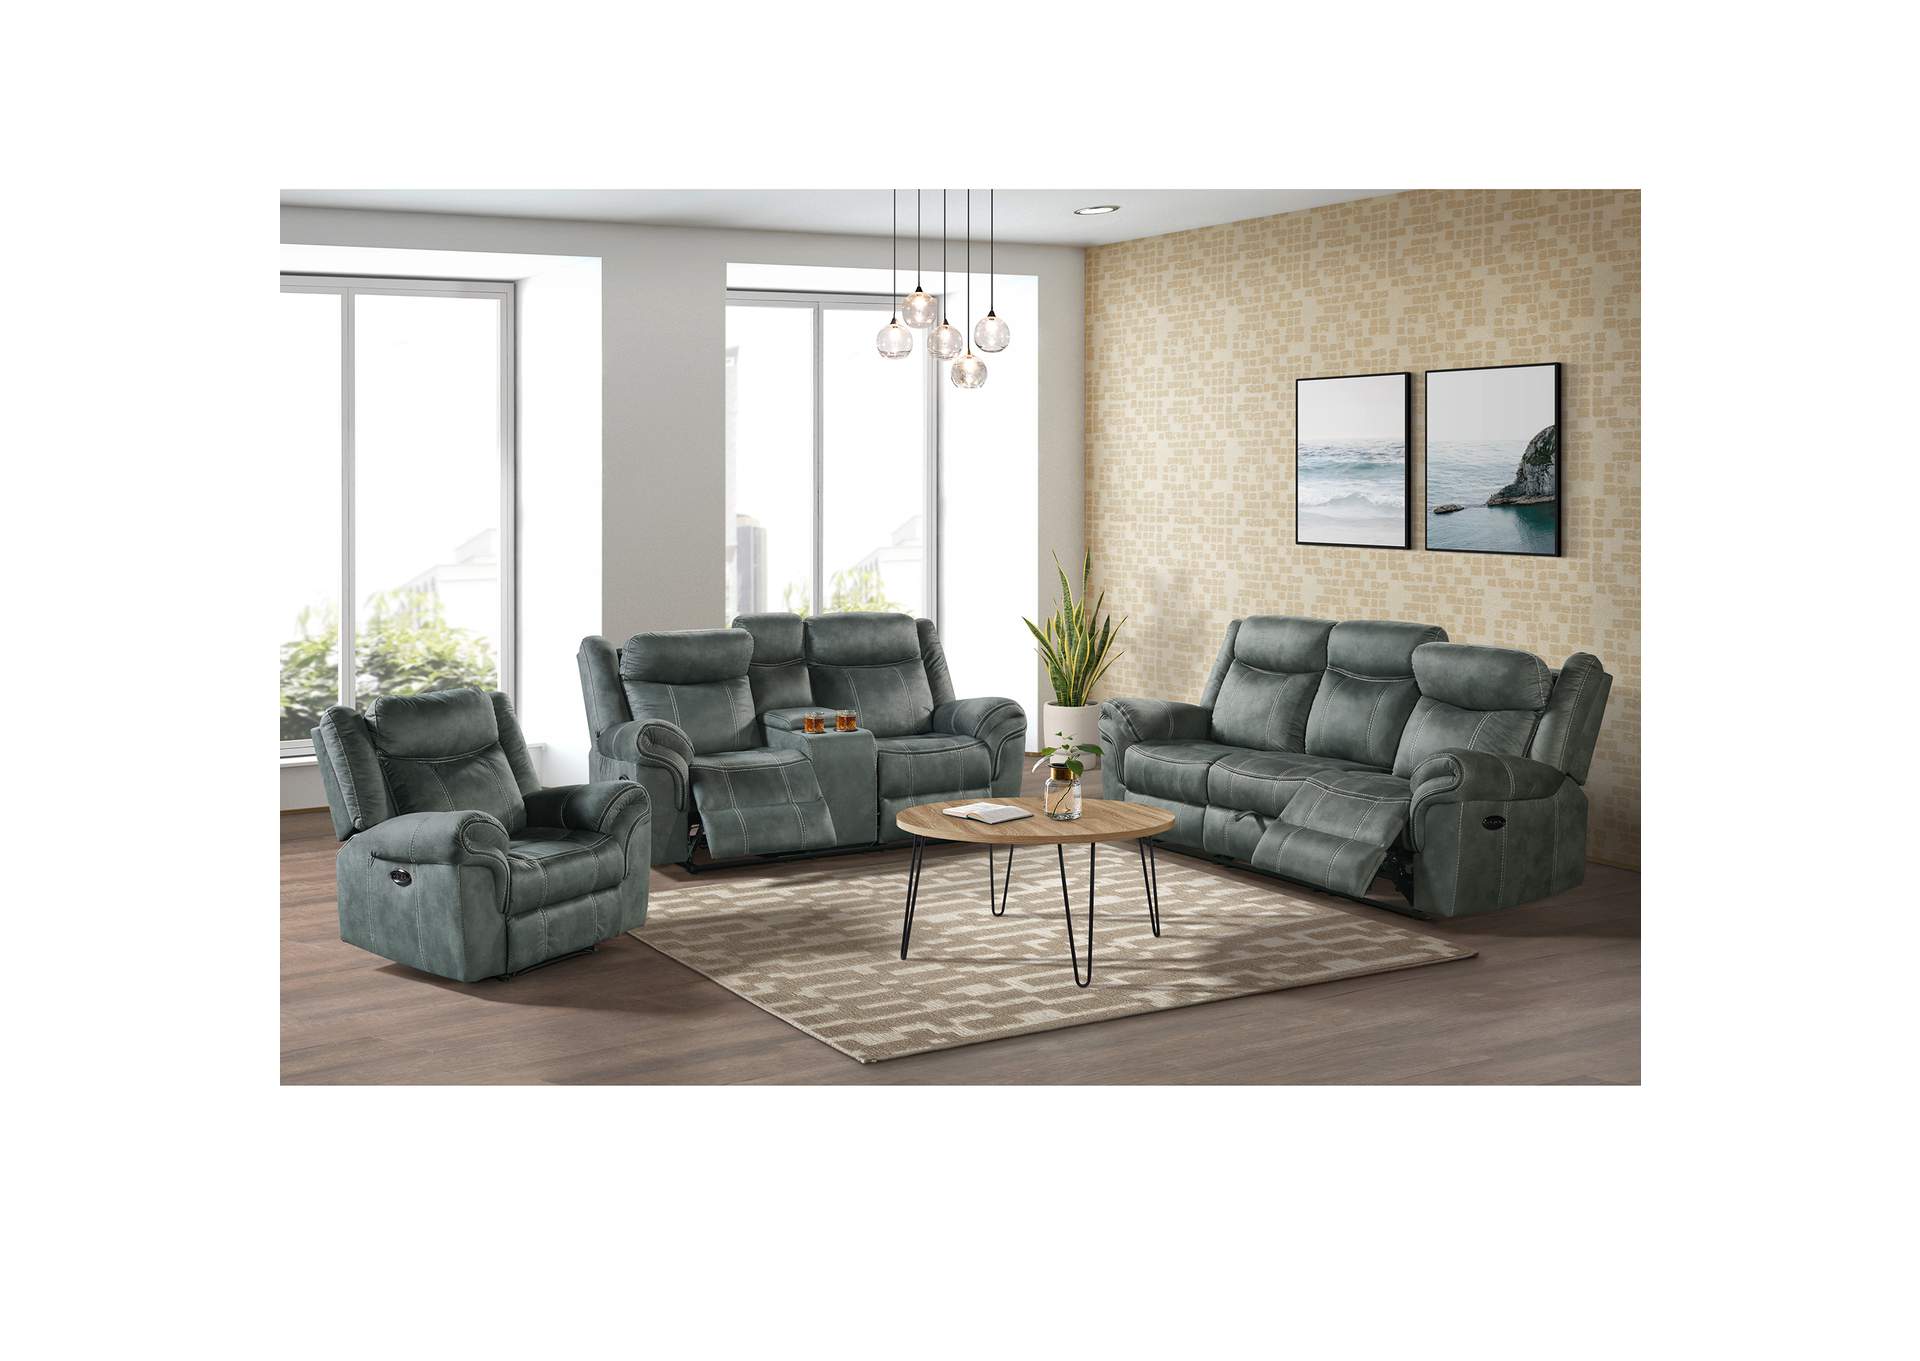 Sorrento Power Motion Sofa With Power Headrest Dropdown In Fb367 Charcoal,Elements